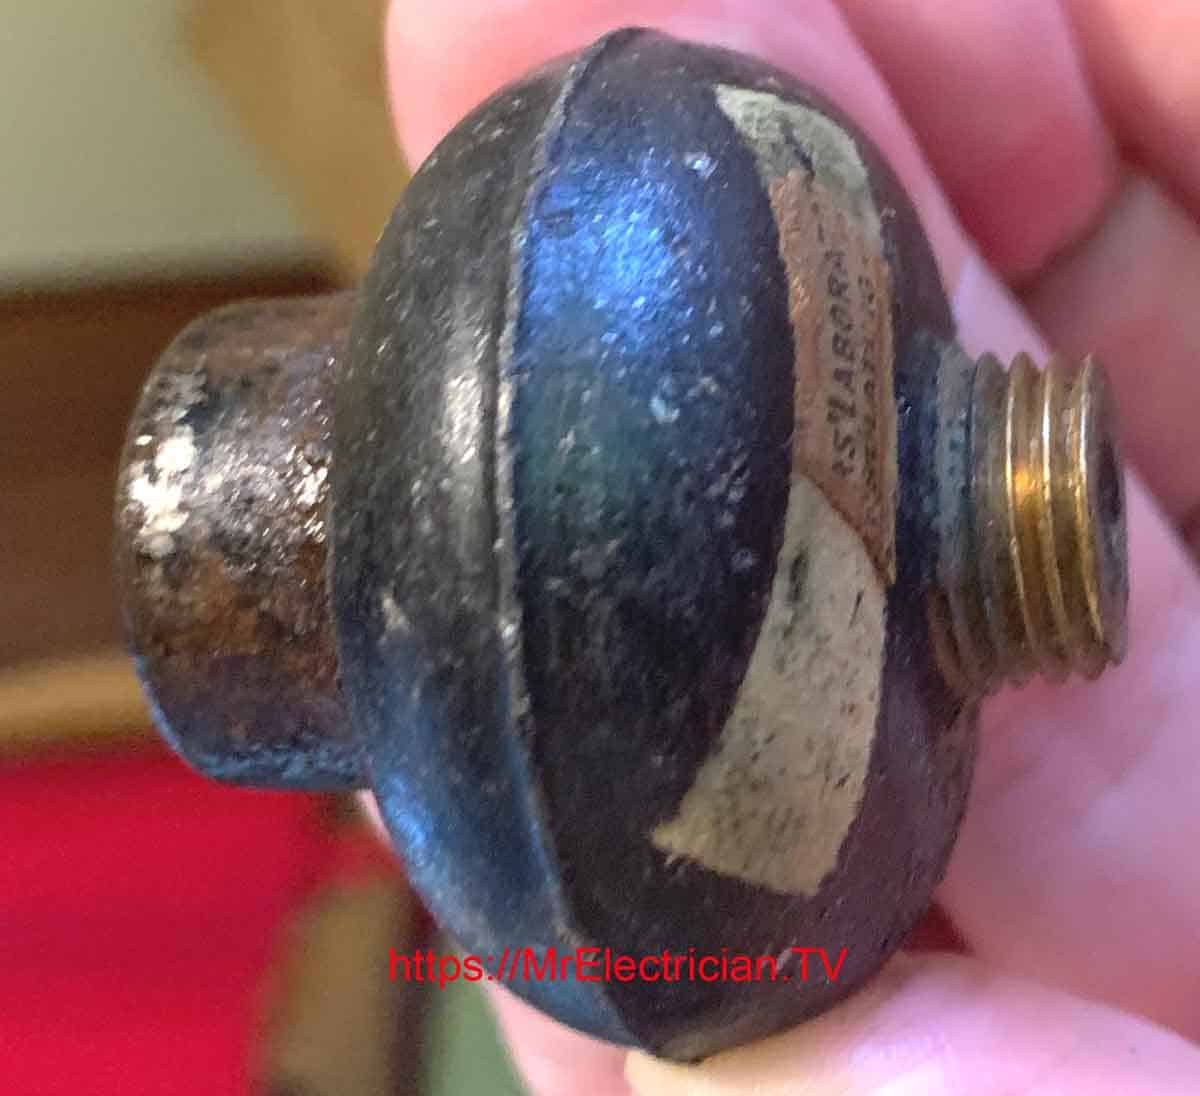 A photo of an electrical insulator that was removed when electric wall sconces were taken down in a 1910 house.